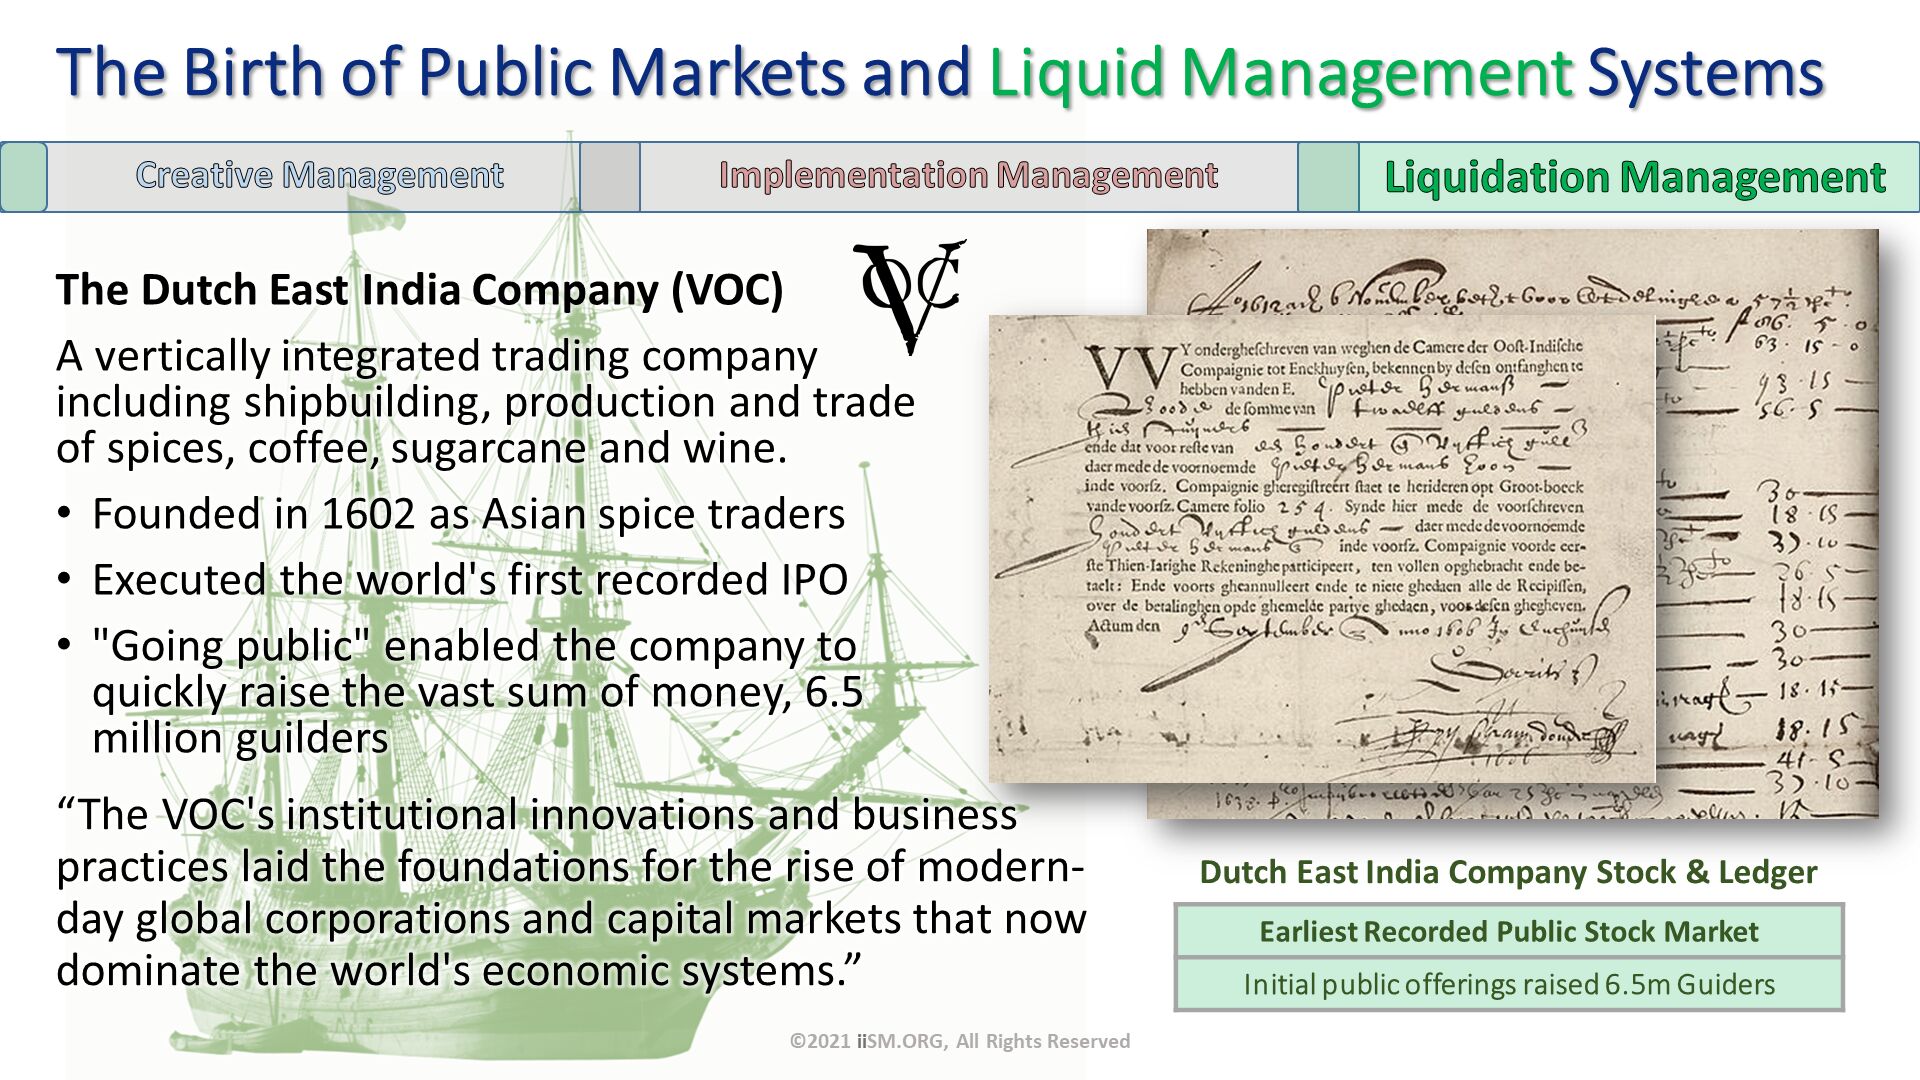 The Dutch East India Company (VOC)
A vertically integrated trading company including shipbuilding, production and trade of spices, coffee, sugarcane and wine.
Founded in 1602 as Asian spice traders
Executed the world's first recorded IPO 
"Going public" enabled the company to quickly raise the vast sum of money, 6.5 million guilders . The Birth of Public Markets and Liquid Management Systems. Dutch East India Company Stock & Ledger. ©2021 iiSM.ORG, All Rights Reserved. “The VOC's institutional innovations and business practices laid the foundations for the rise of modern-day global corporations and capital markets that now dominate the world's economic systems.”. 